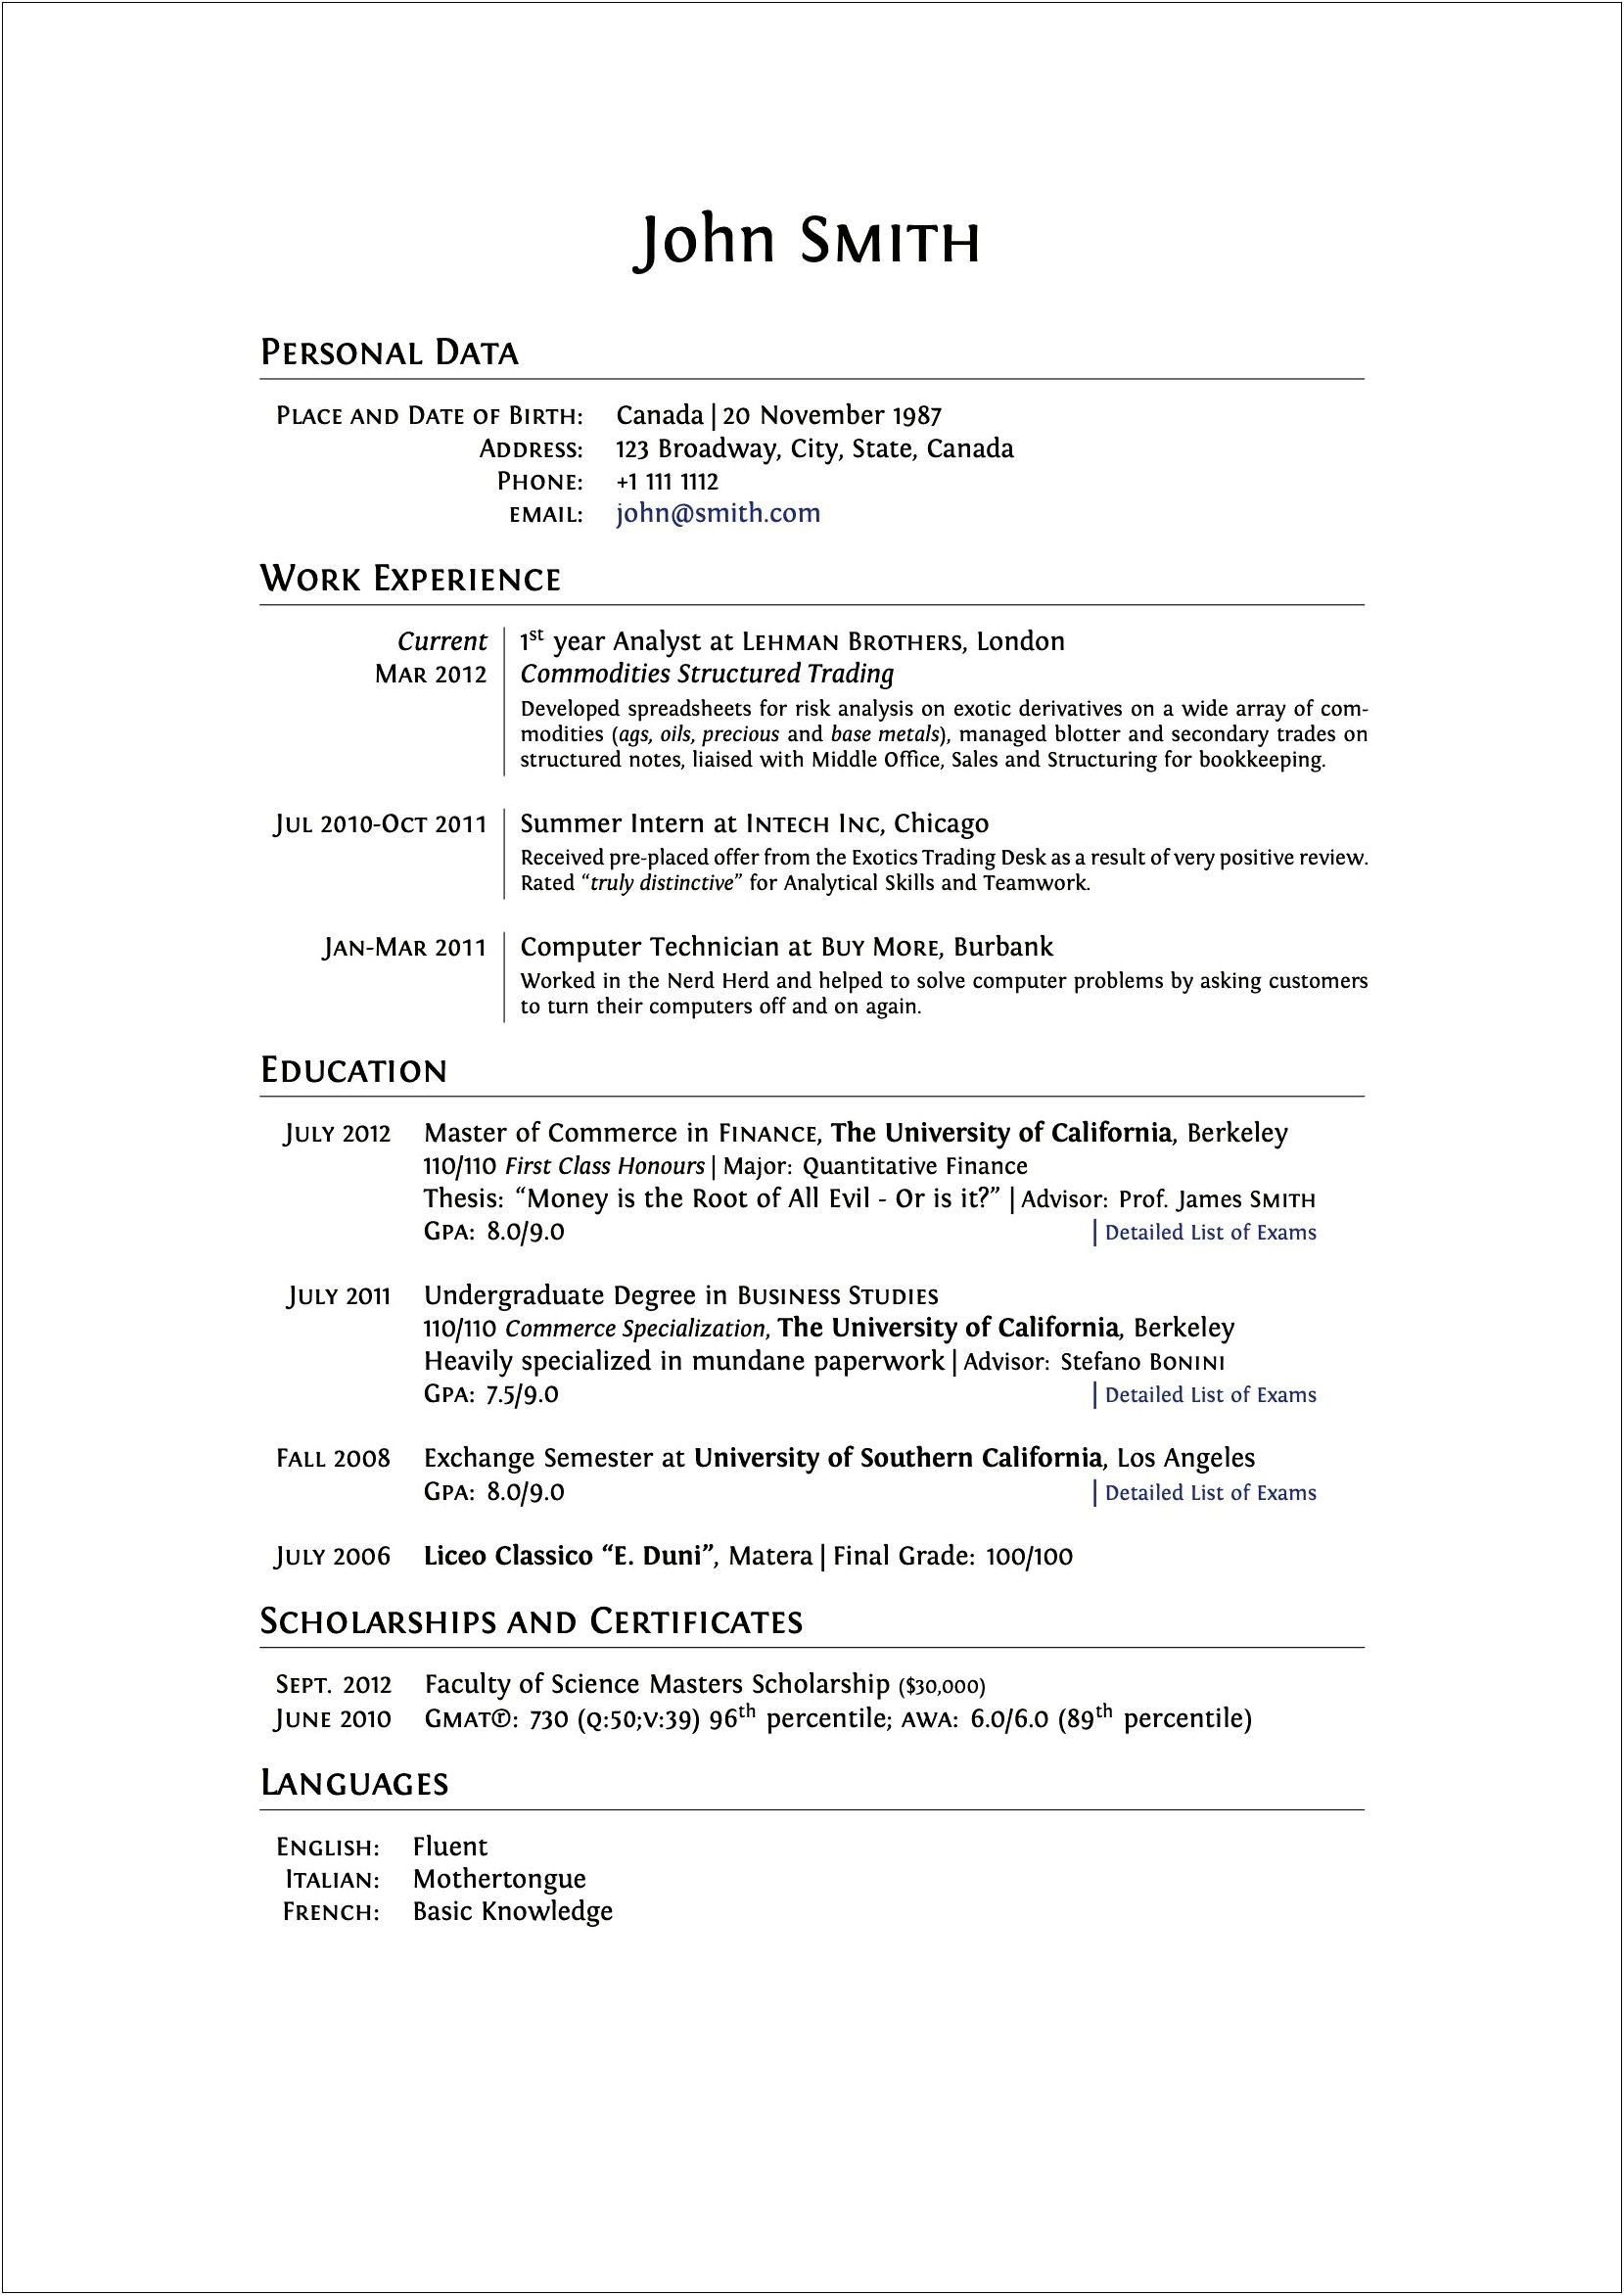 Sample First Year College Student Resume